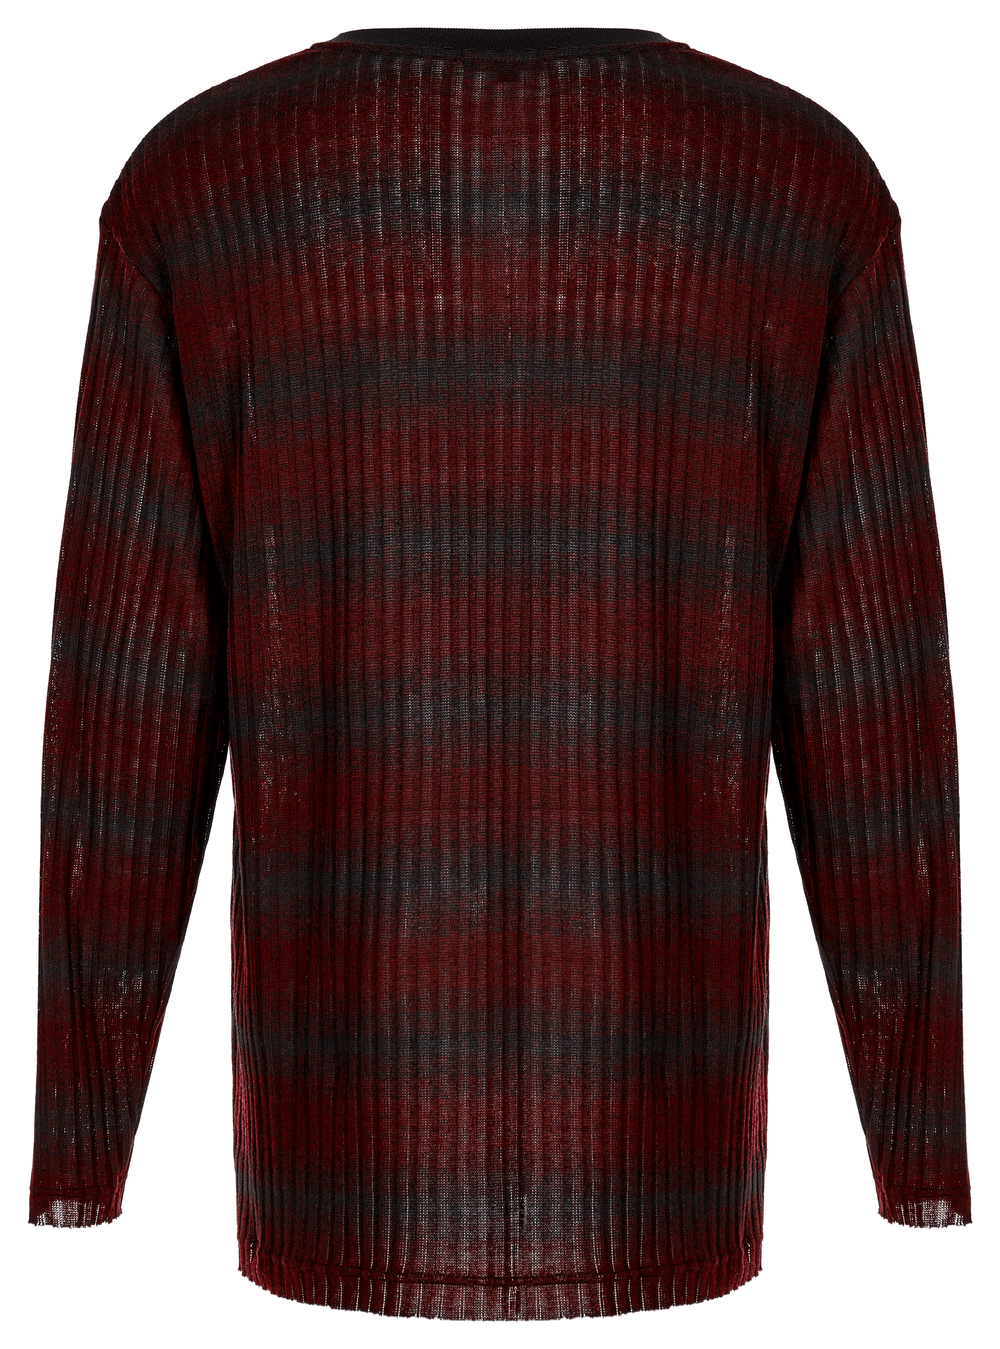 Men's Edgy Striped Knit Sweater with Metal Detail